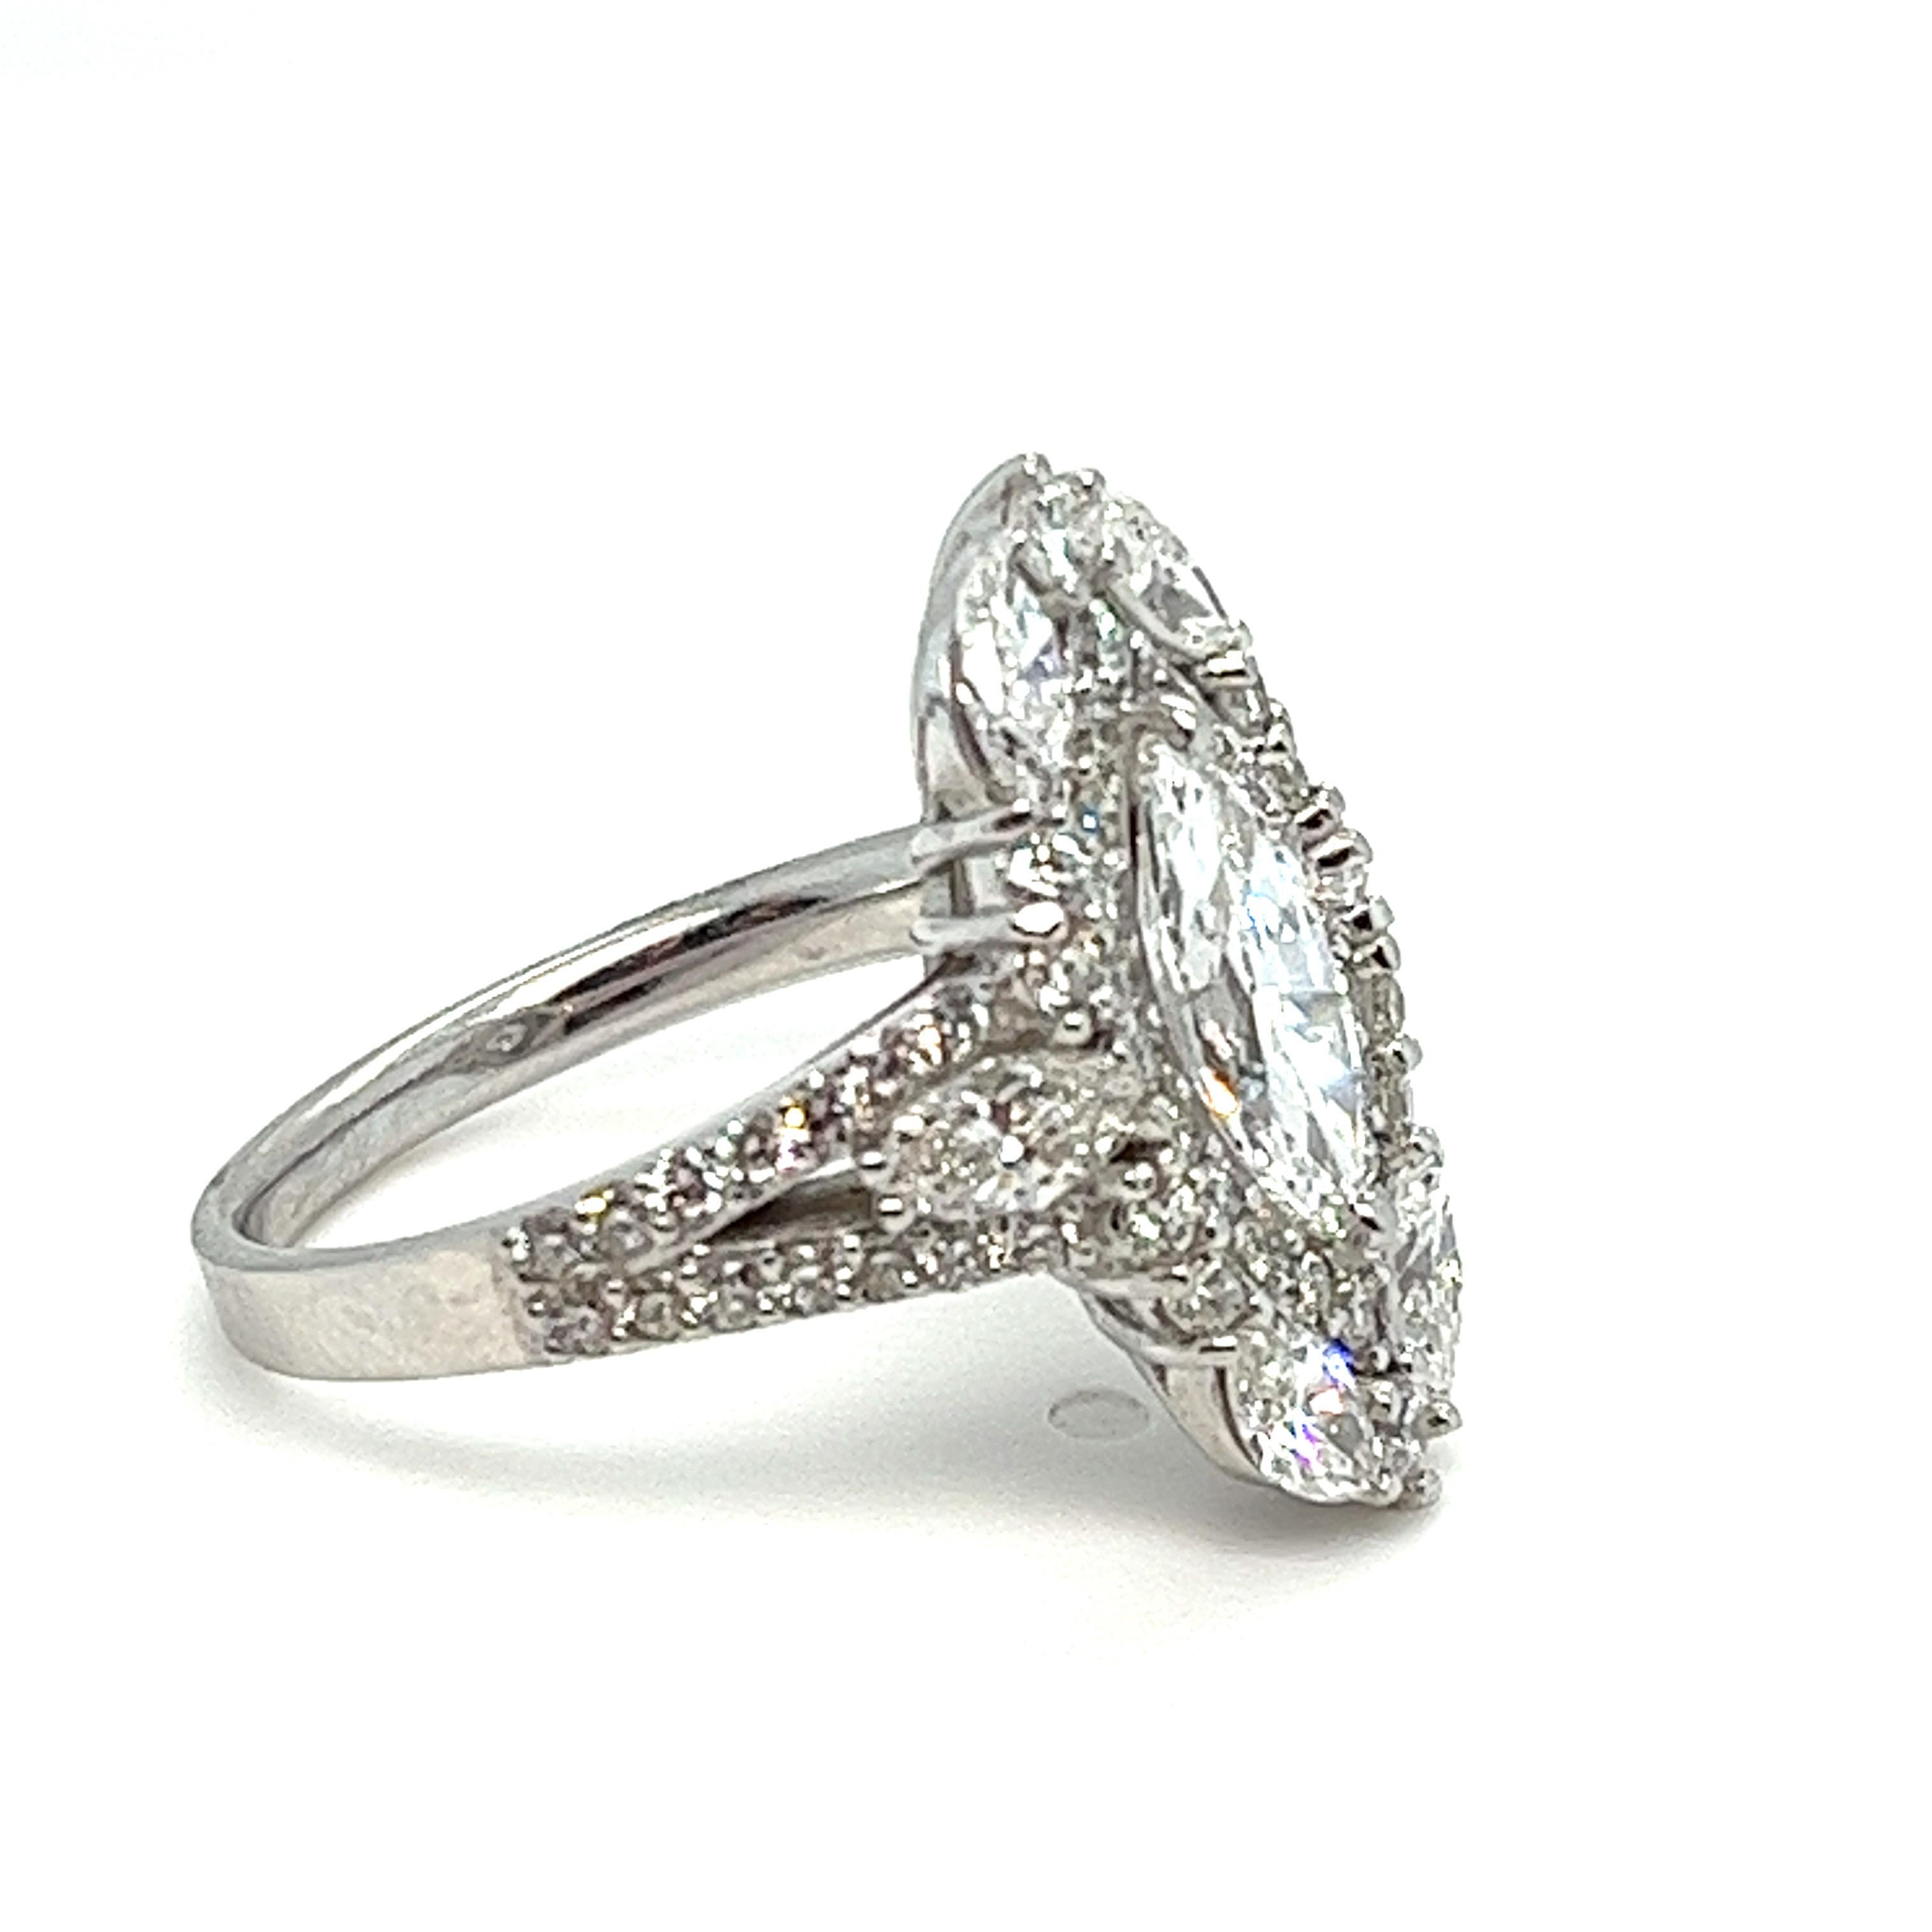 Marquise Cut Stunning 2.99 Carat Total Weight Marquise Diamond Ring in 18K White Gold For Sale